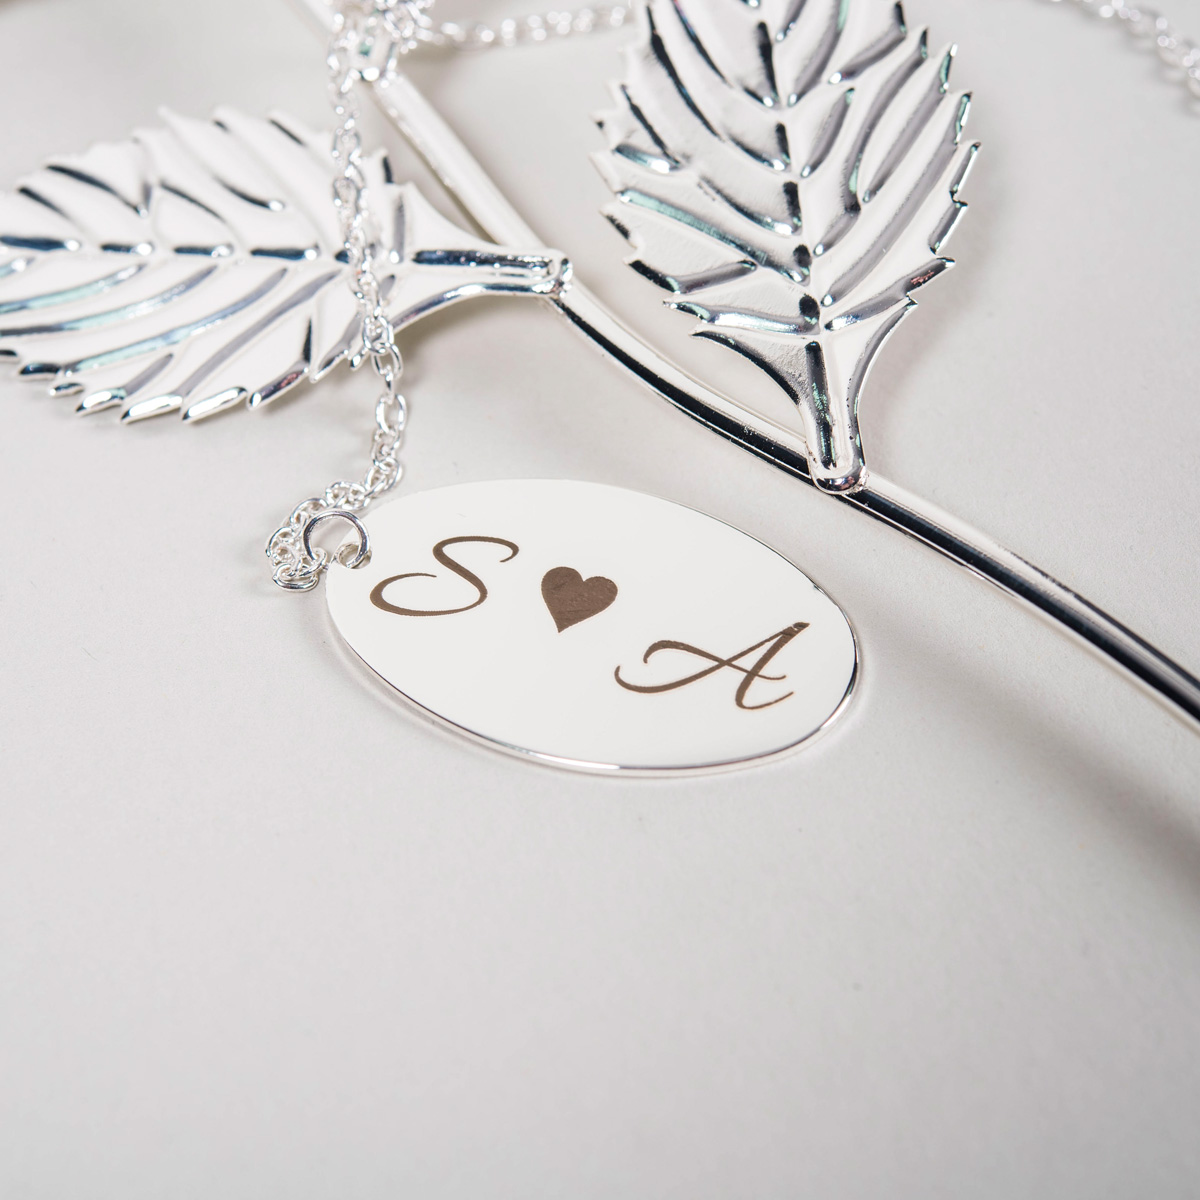 Personalised Engraved Silver-Plated Rose - Couples Initials